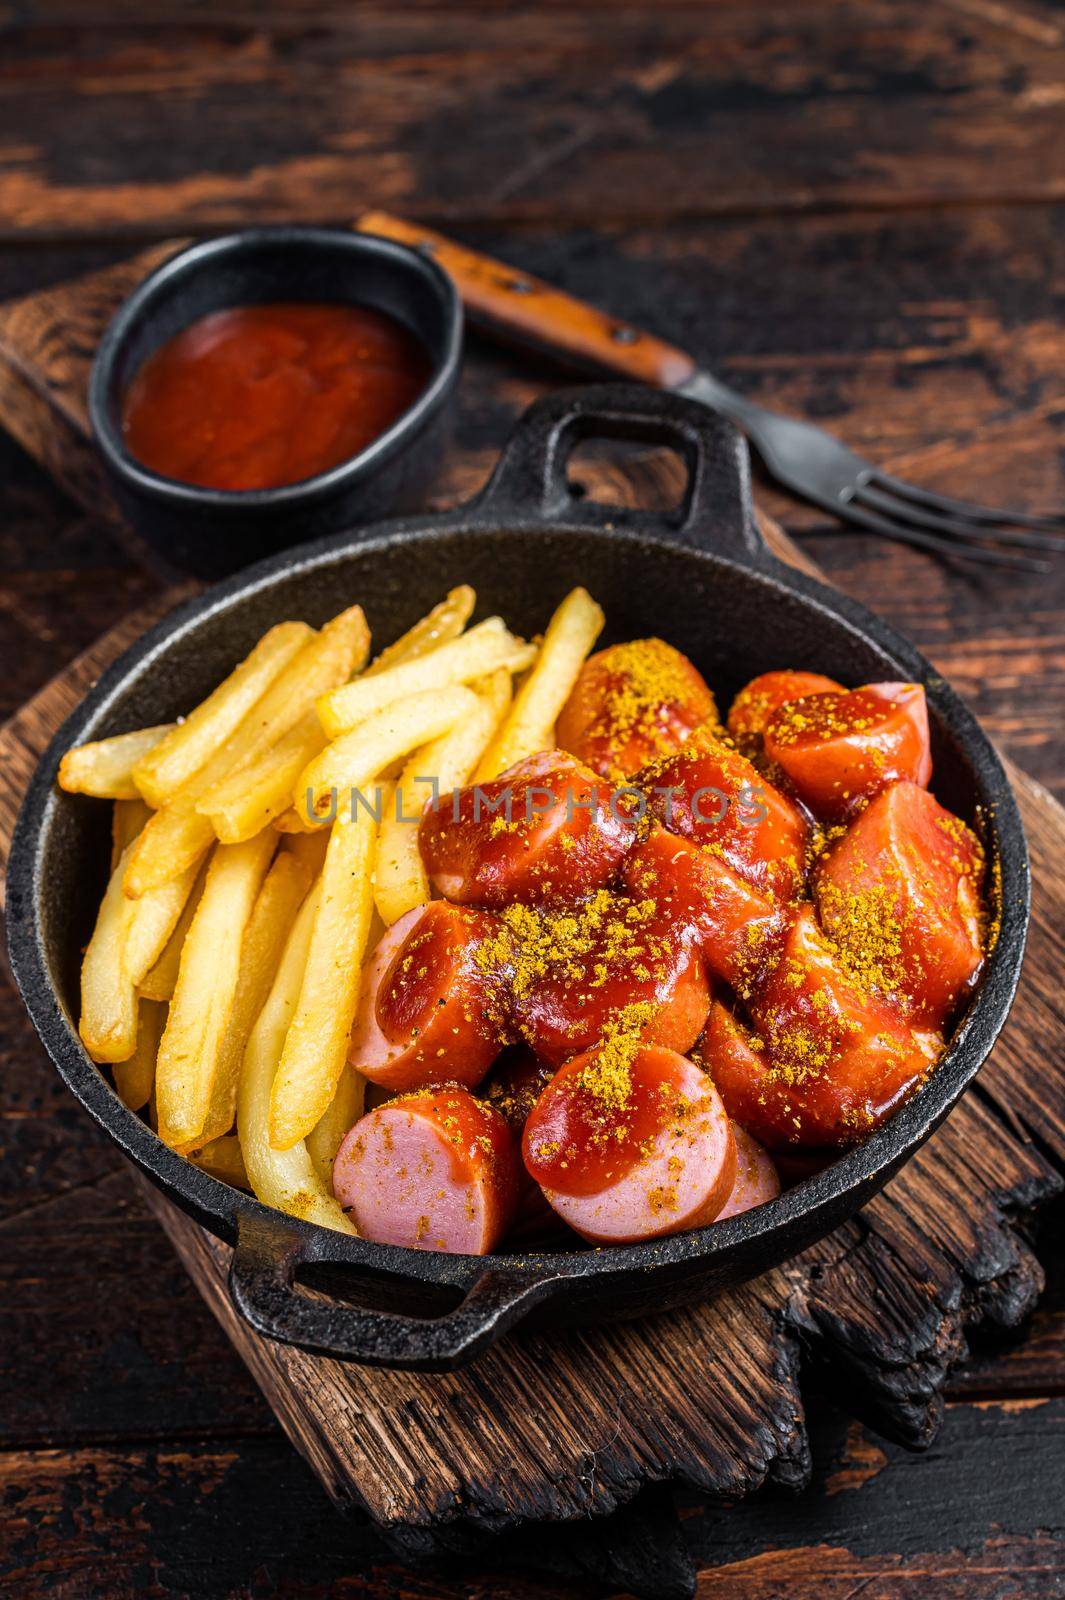 Currywurst street food meal, Curry spice on wursts served French fries in a pan. Dark wooden background. Top view.